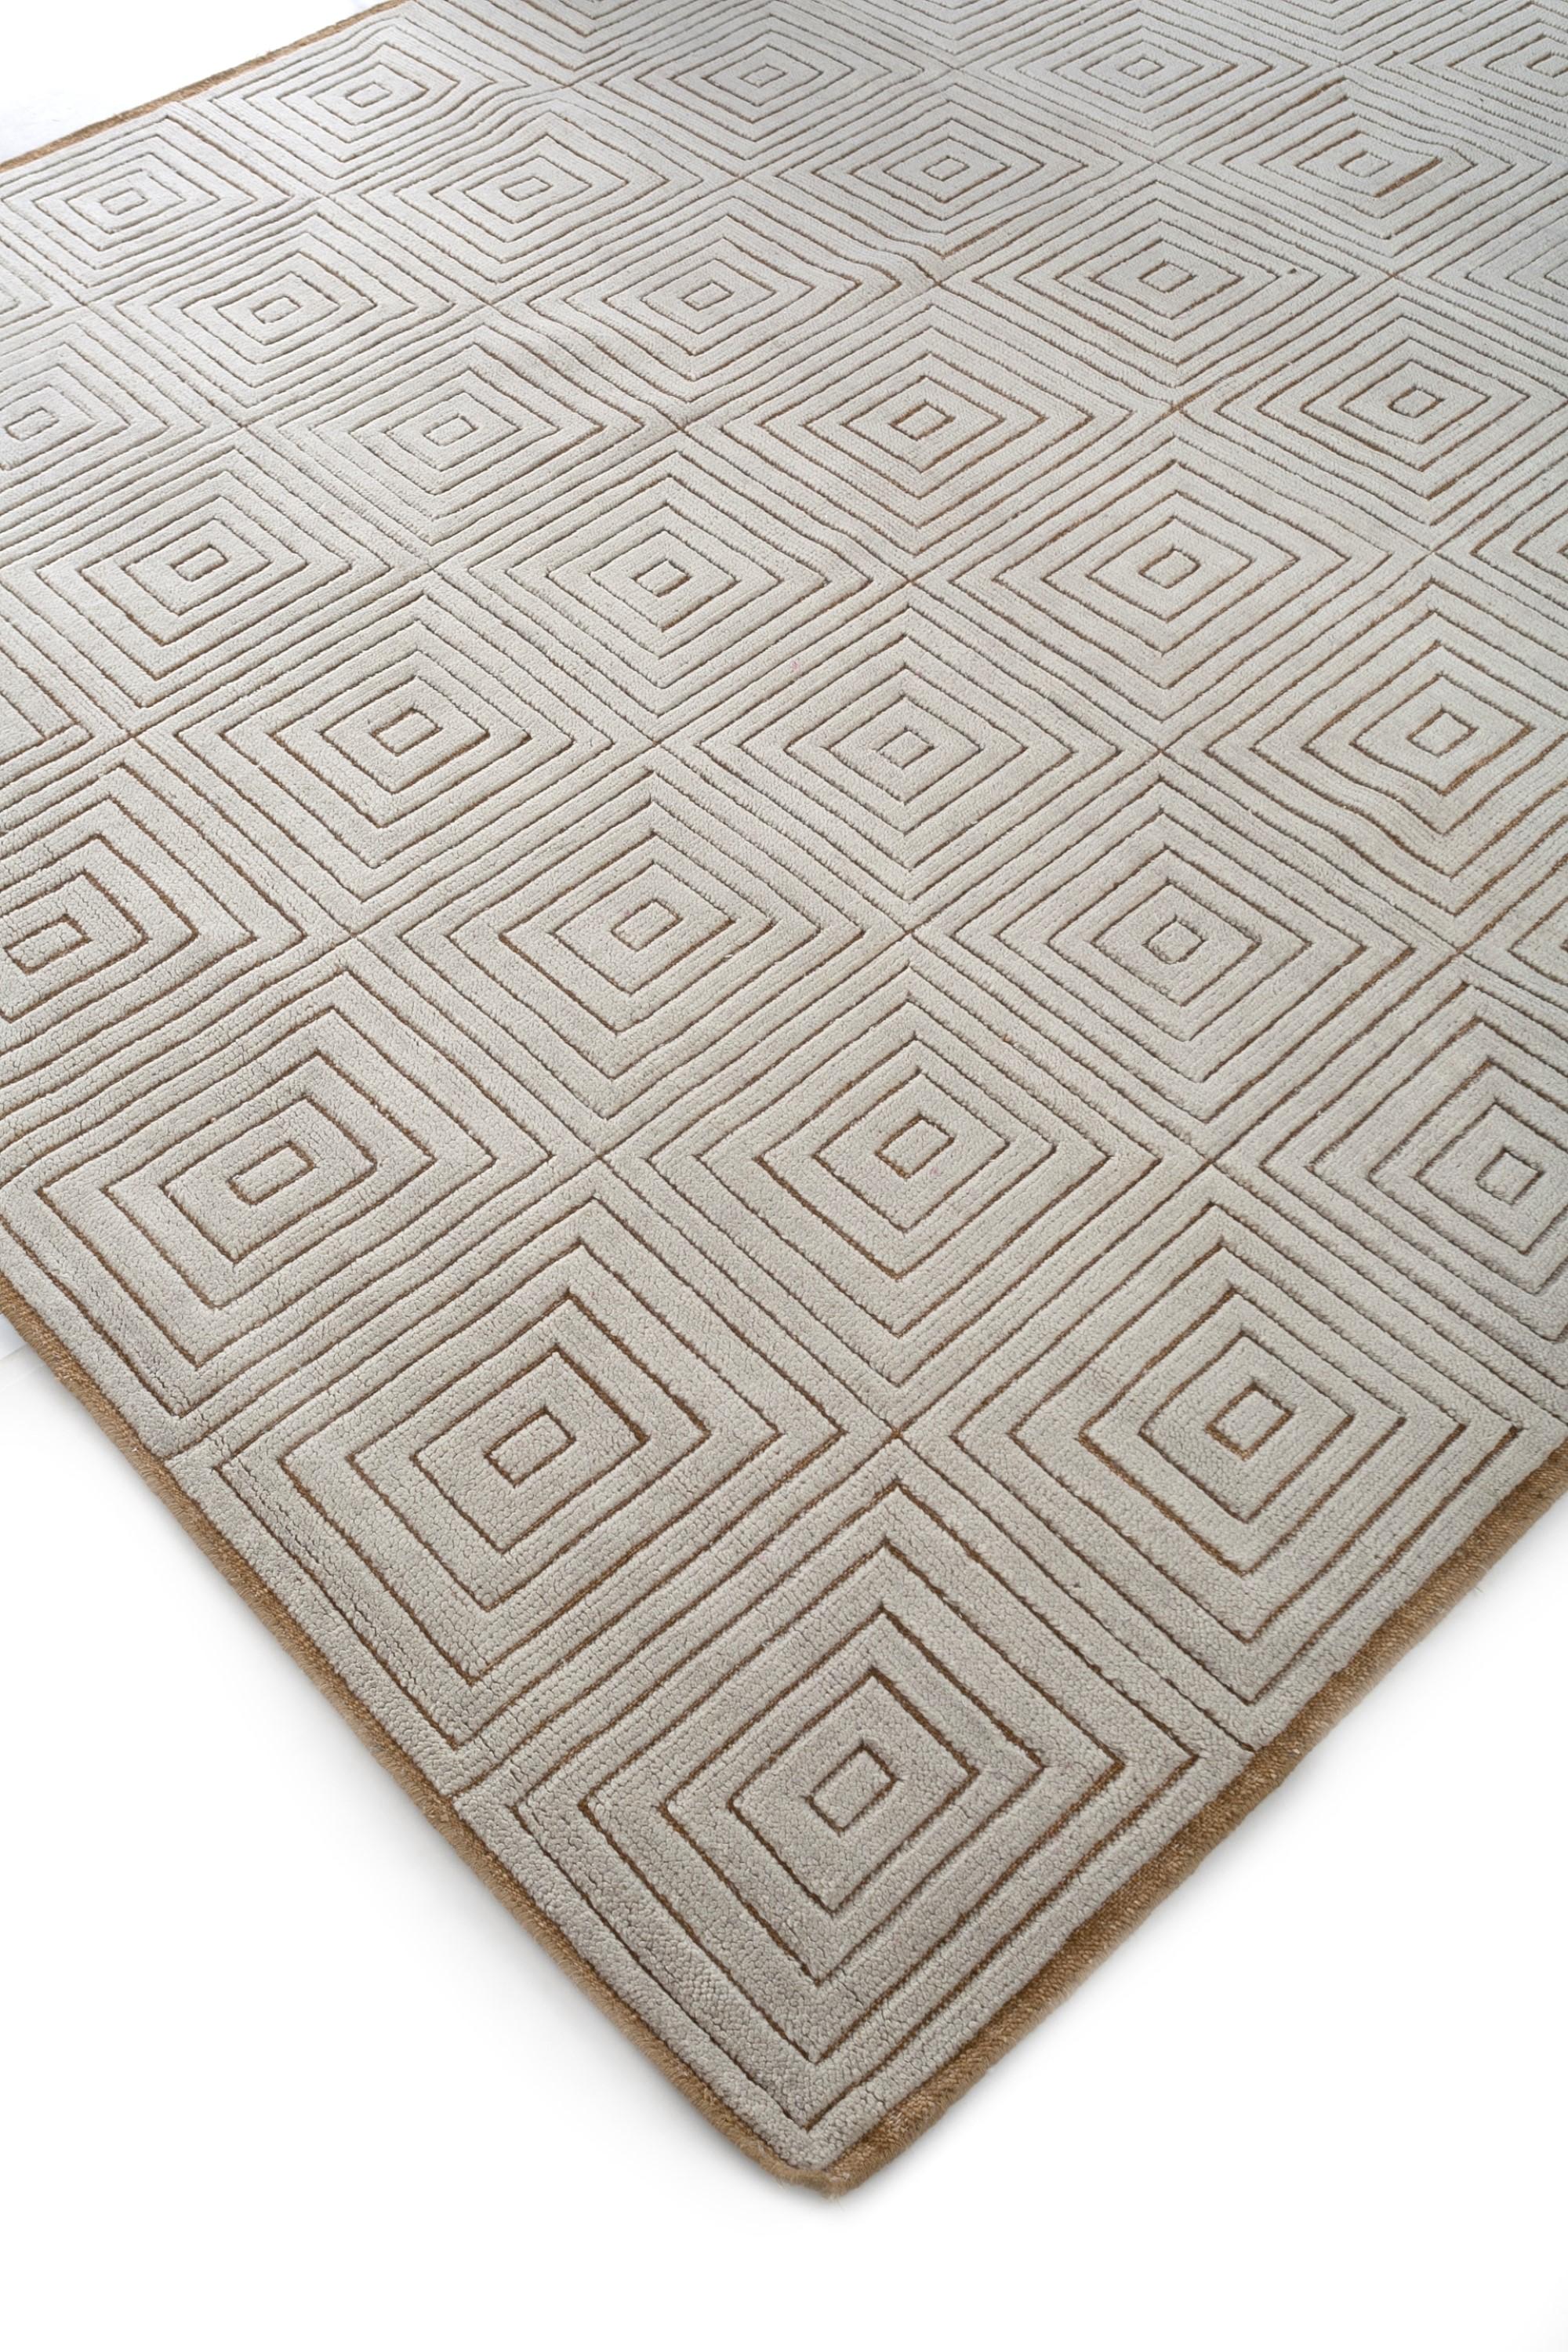 Modern Sahara Dreams Antique White & Honey Yellow 240X300 cm Handknotted Rug For Sale